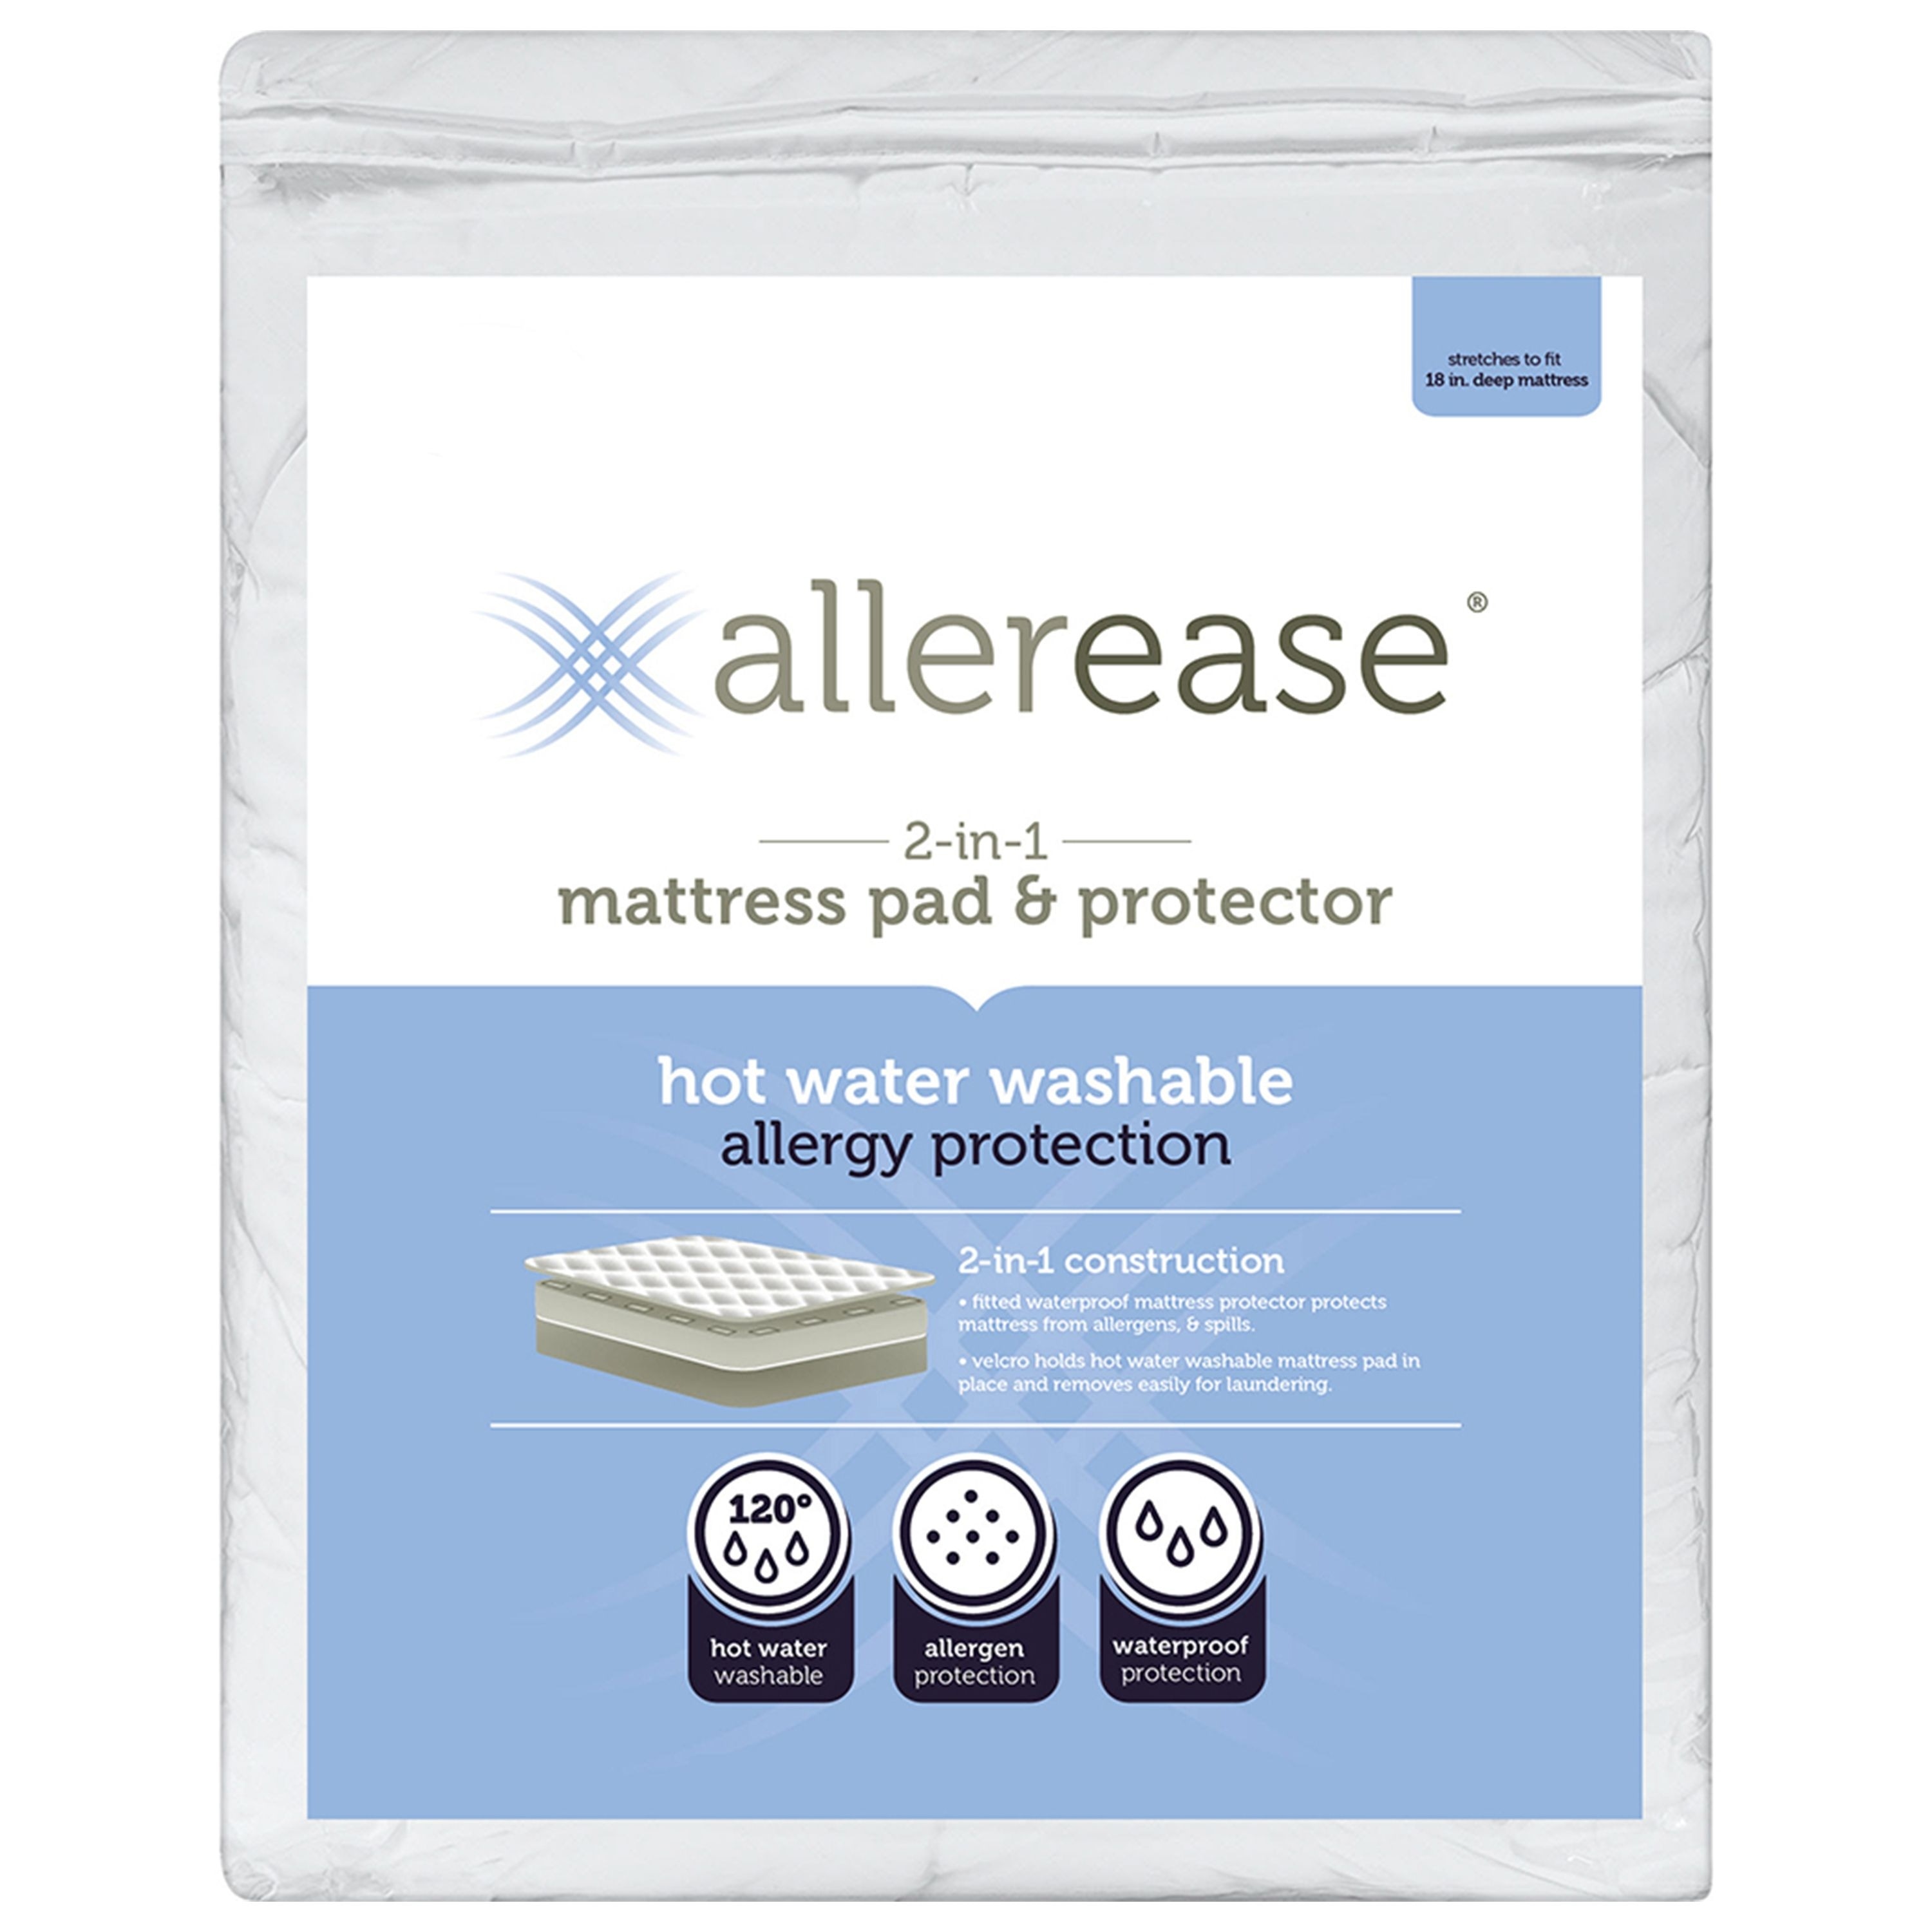 AllerEase Brand Protective Bedding 